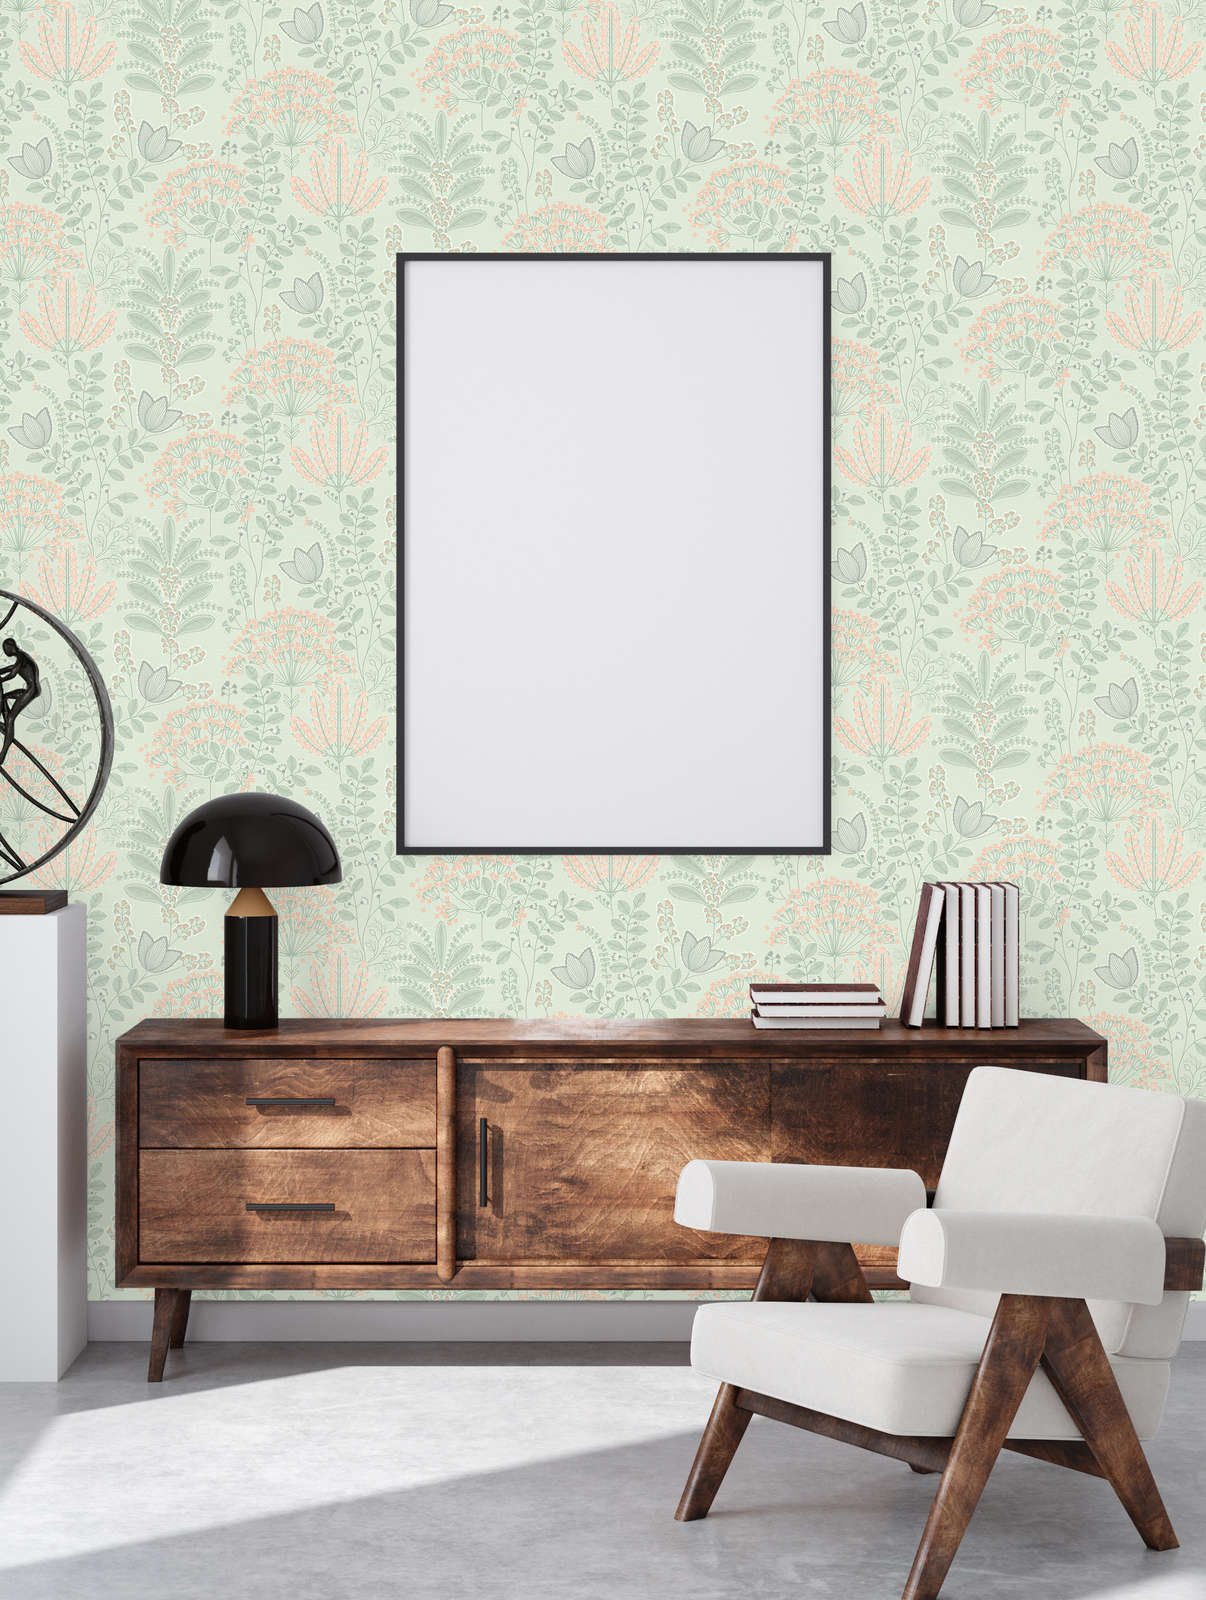             wallpaper floral with leaves in retro look light textured, matt - green, grey, pink
        